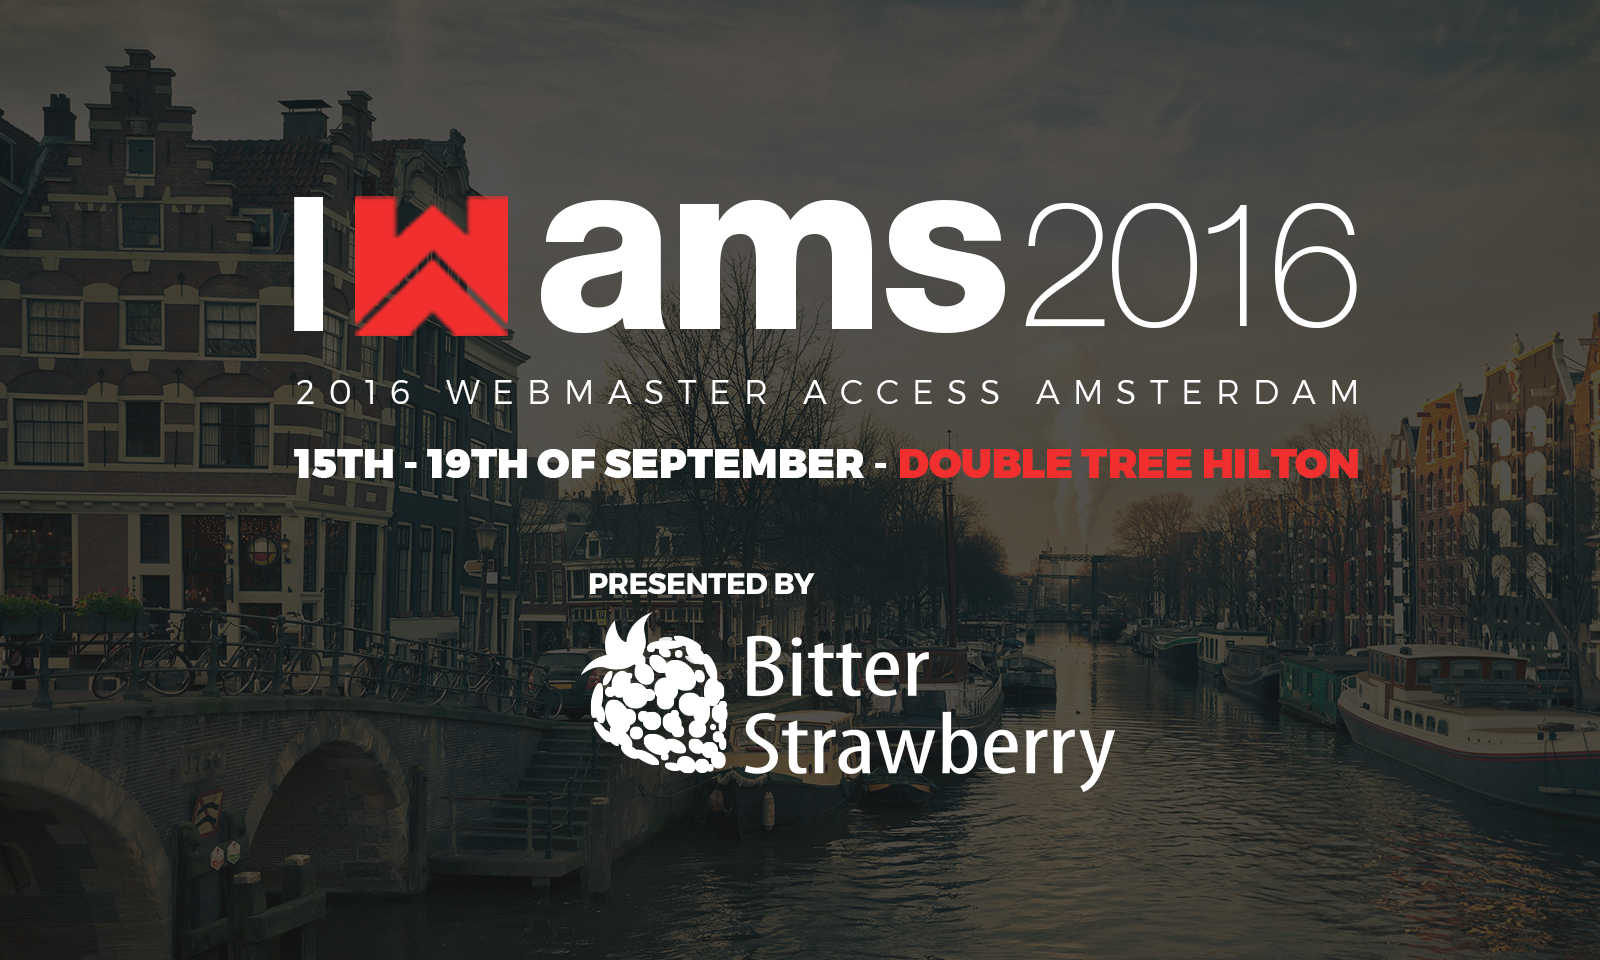 BitterStrawberry Returns as Presenting Sponsor of Webmaster Access